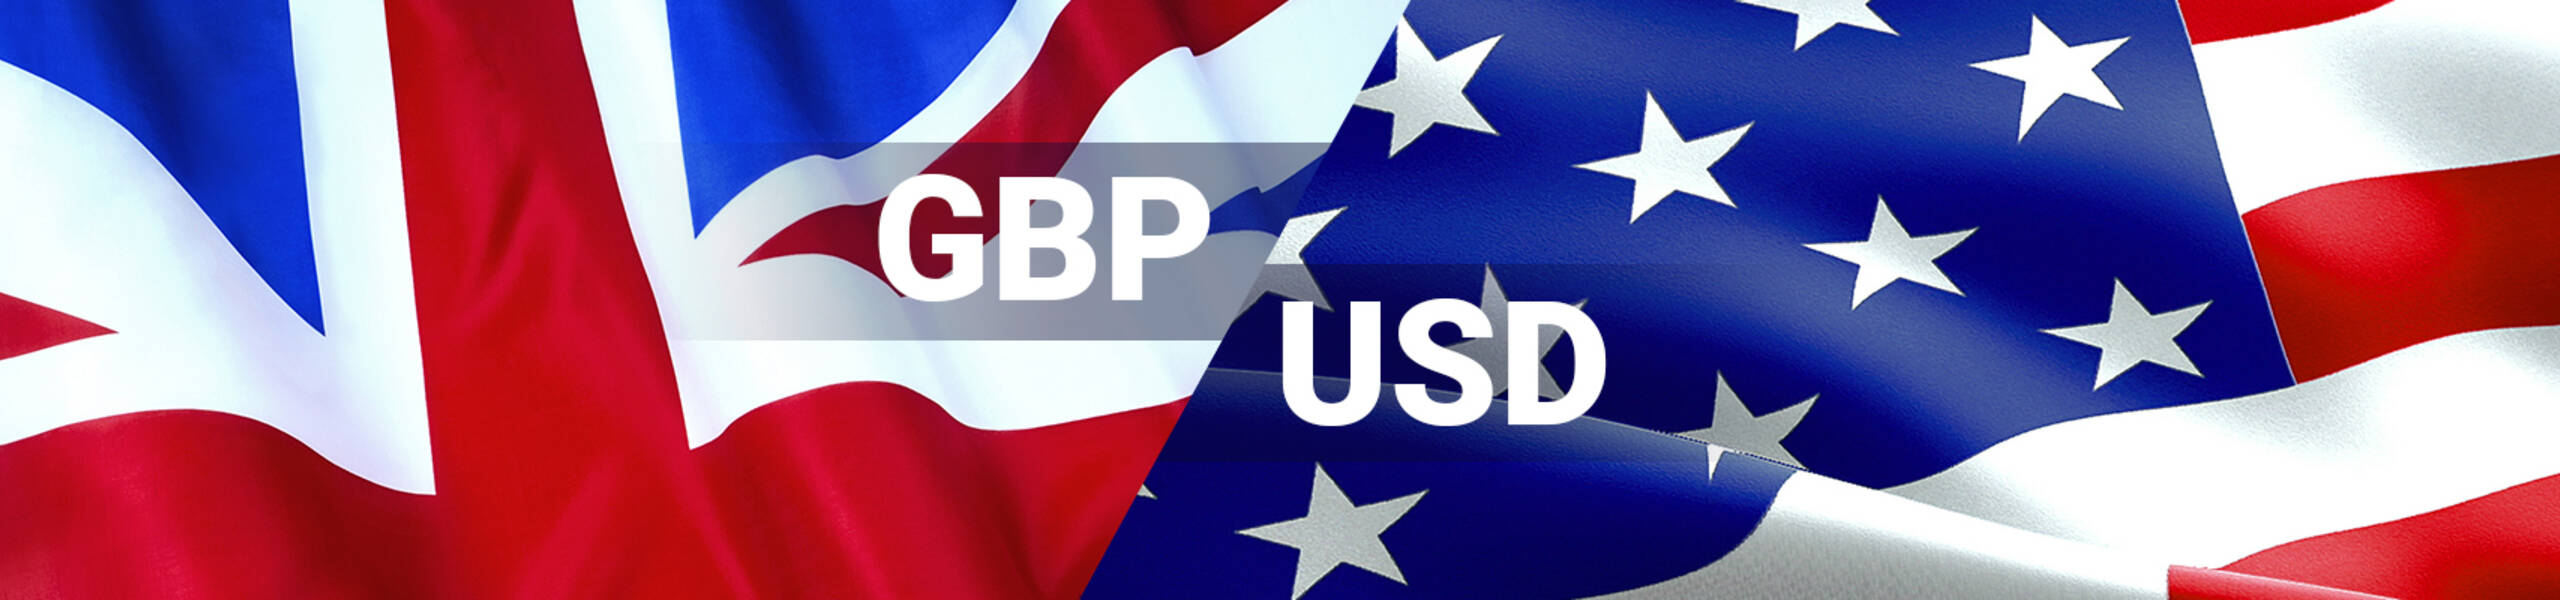 GBP/USD: pound supported by Senkou Span A